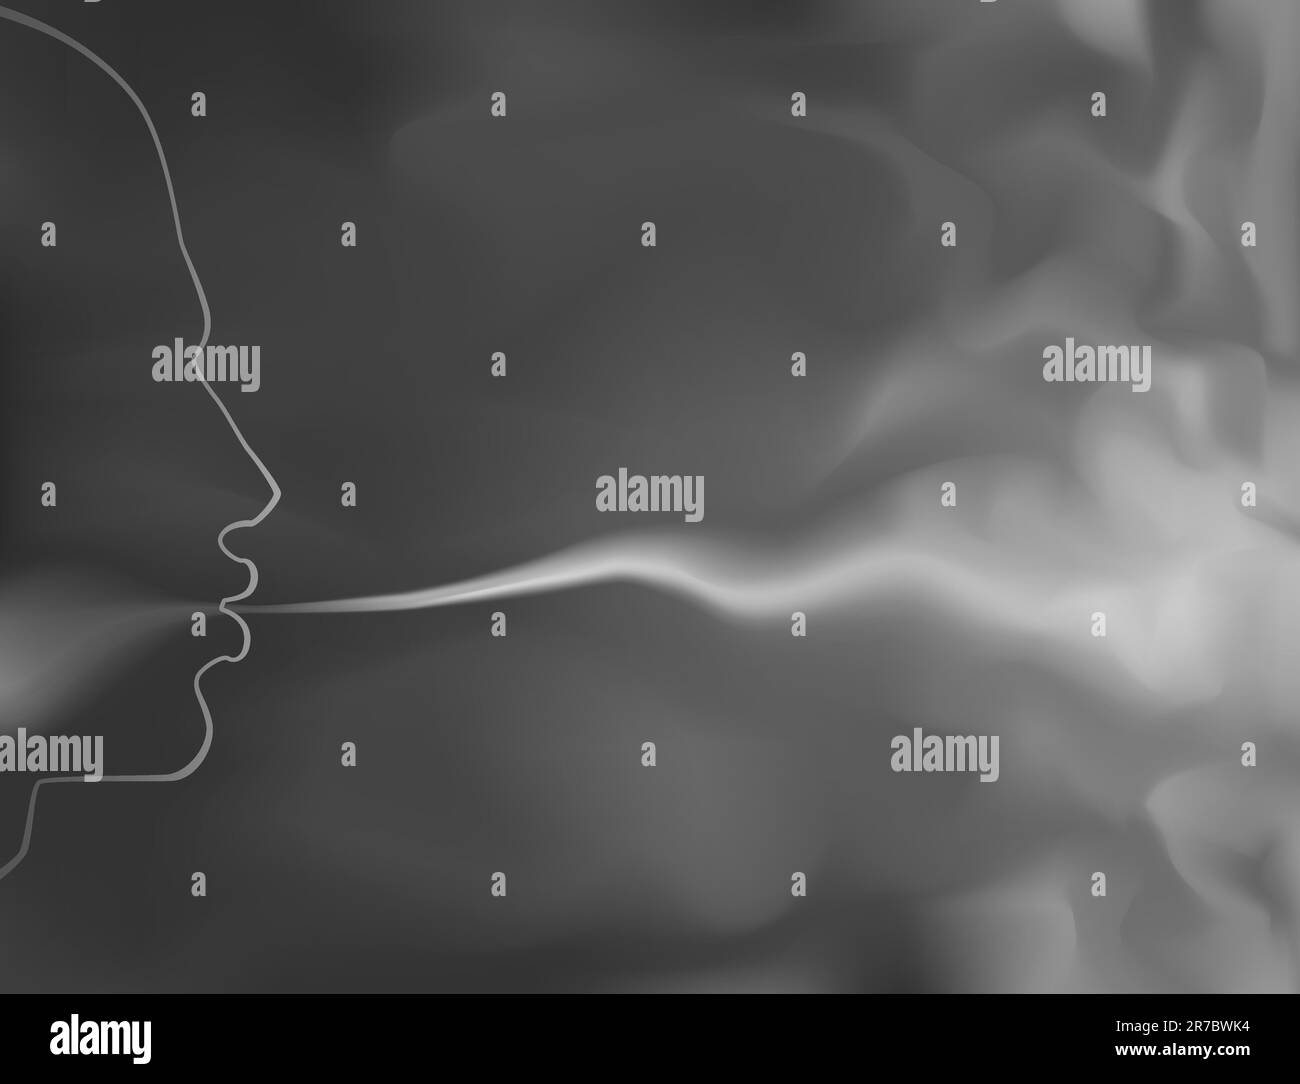 Editable vector illustration of a man blowing smoke made with a gradient mesh Stock Vector